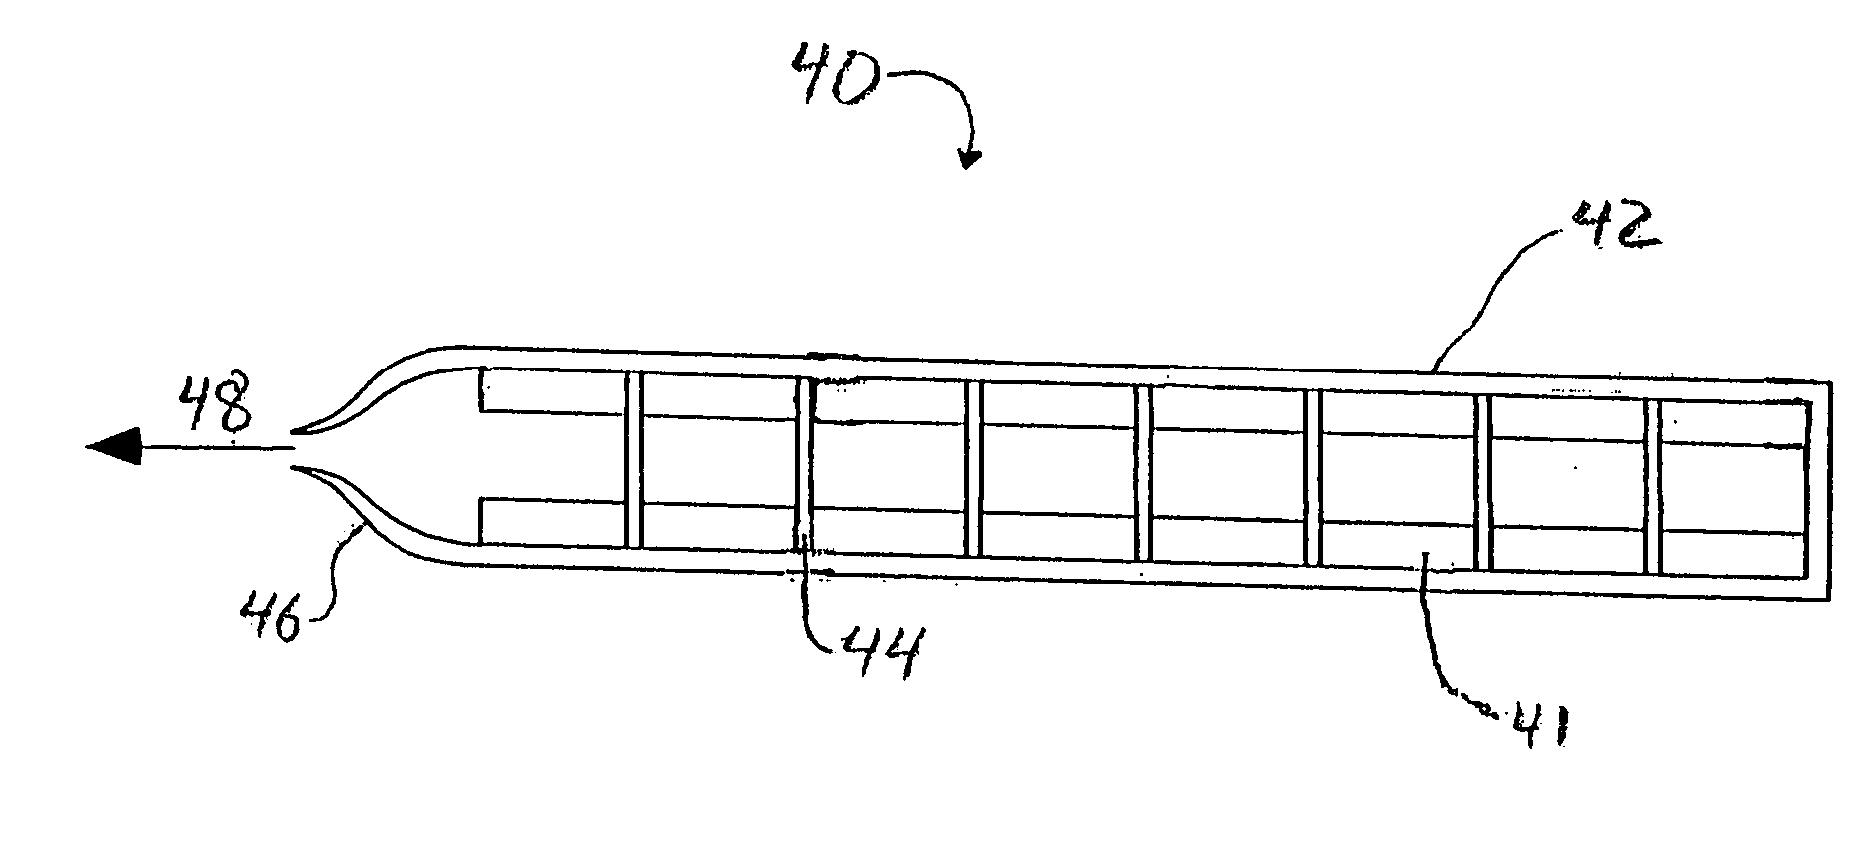 Polyoxymethylene as structural support member and propellant